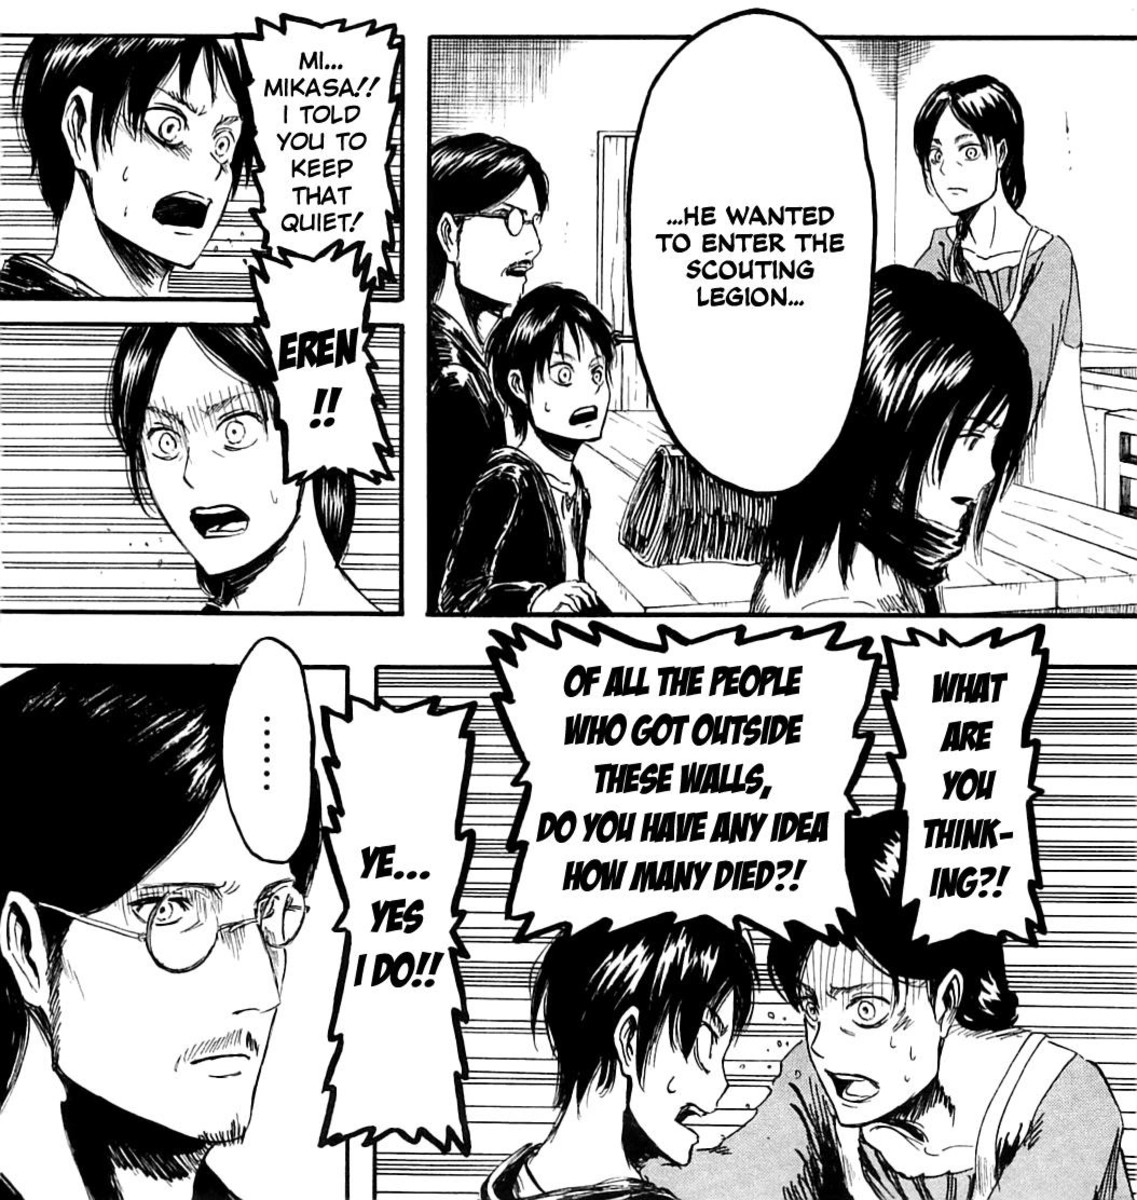 Seventeen Shingeki No Kyojin Attack On Titan Facts About Eren Yeager Hubpages Eren's long hair in chapter 90 reminds me of the first draft storyboard of the manga. on titan facts about eren yeager